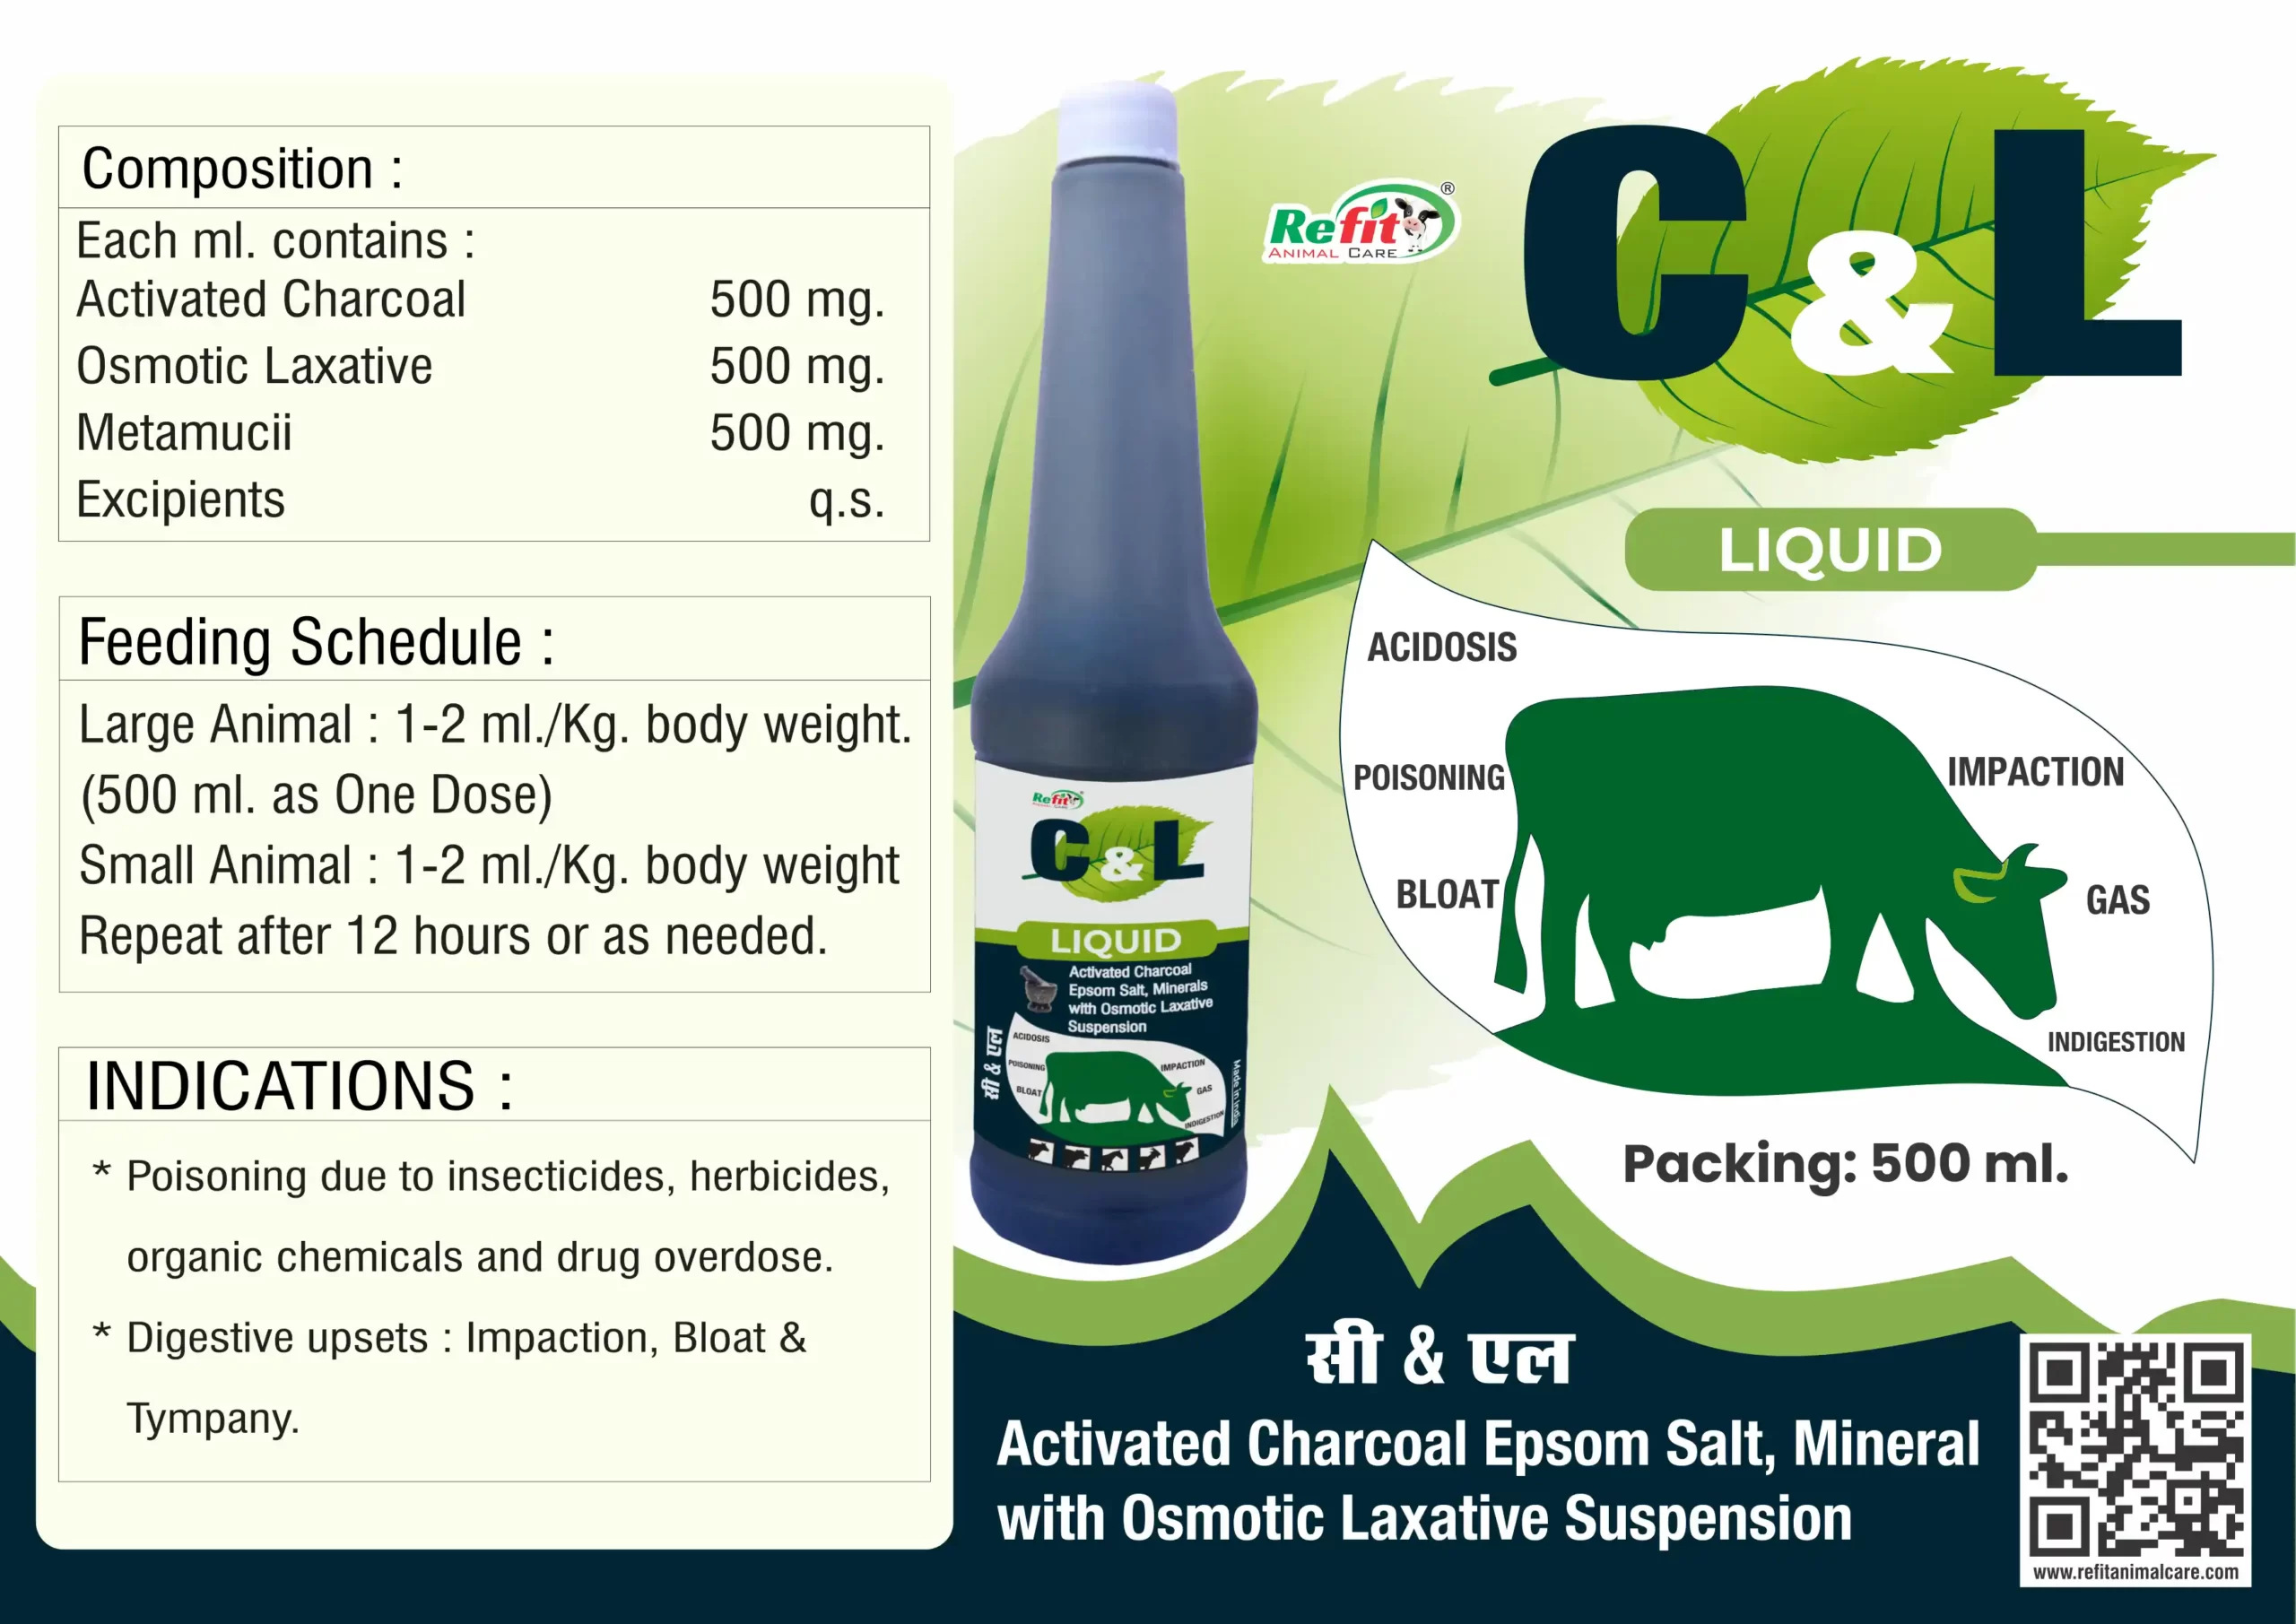 C & L LIQ. - Activated Charcoal For Cattle and Cows in INDIA